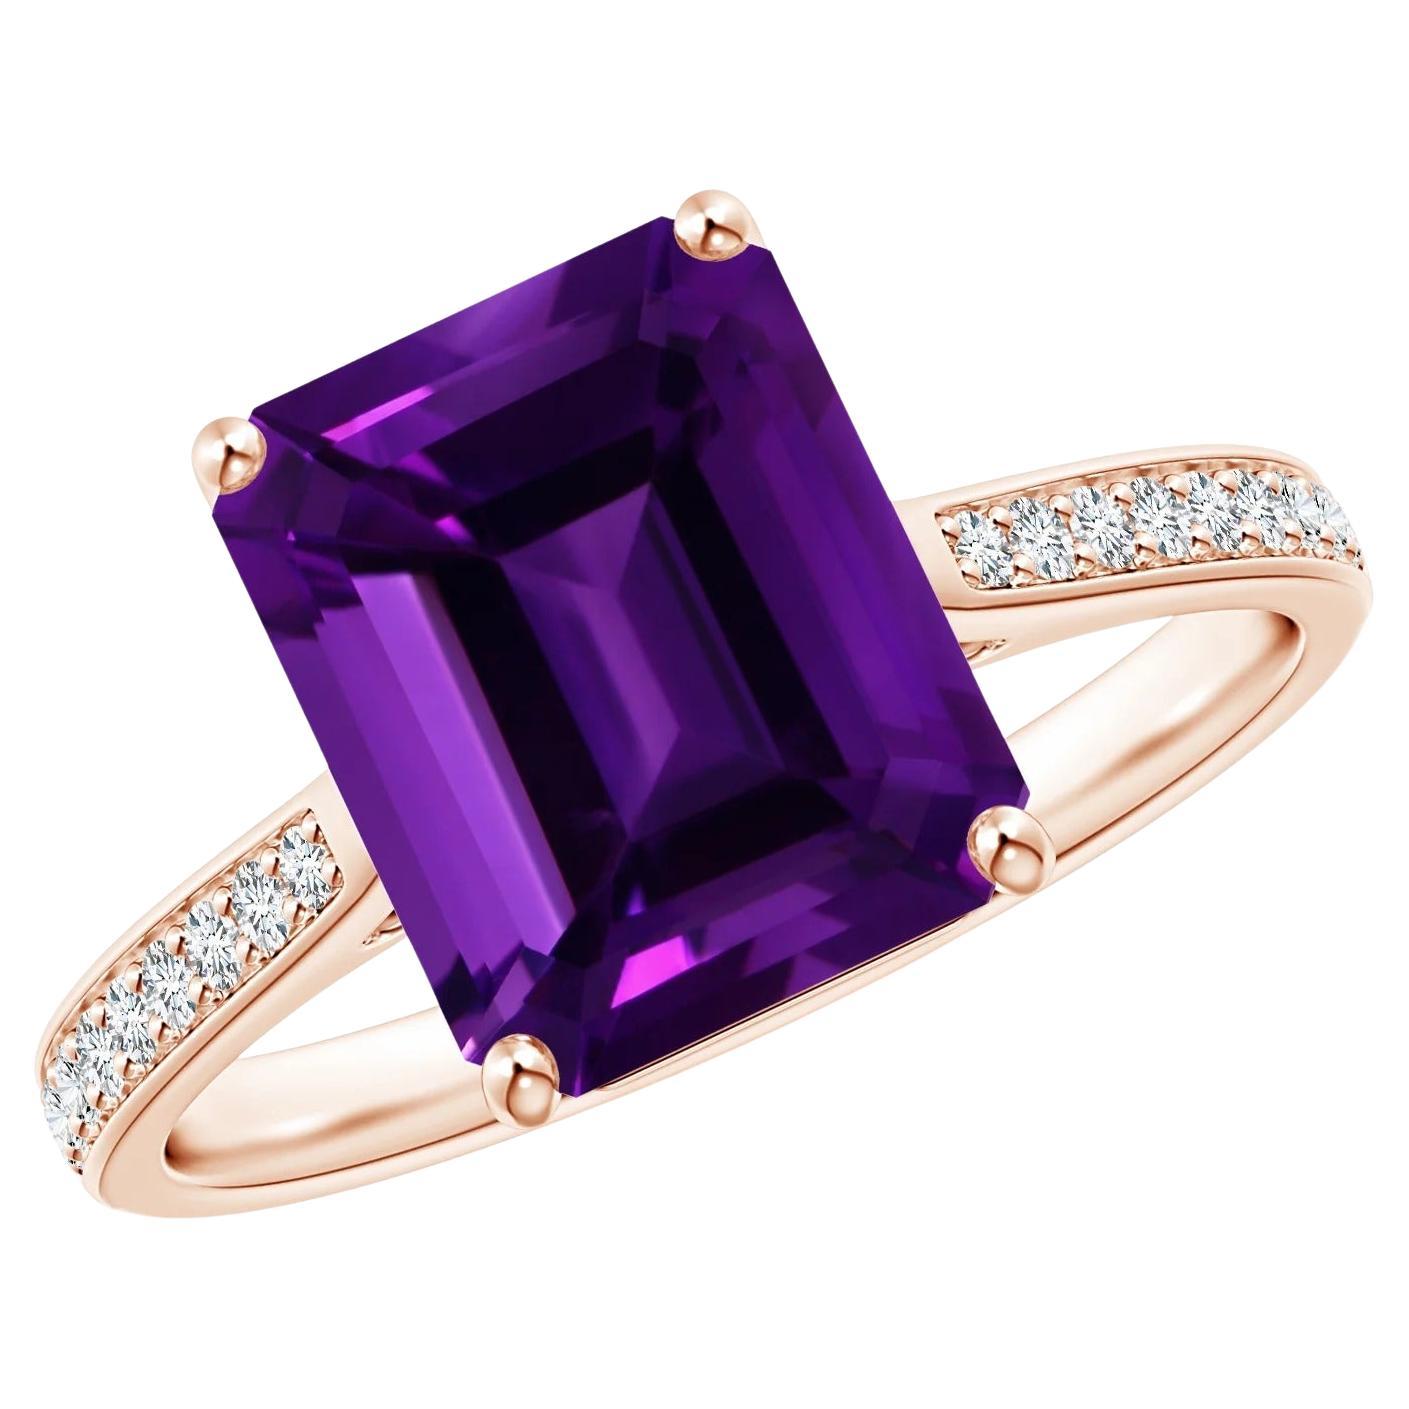 For Sale:  Angara GIA Certified Natural Amethyst Cocktail Ring in Rose Gold with Diamonds